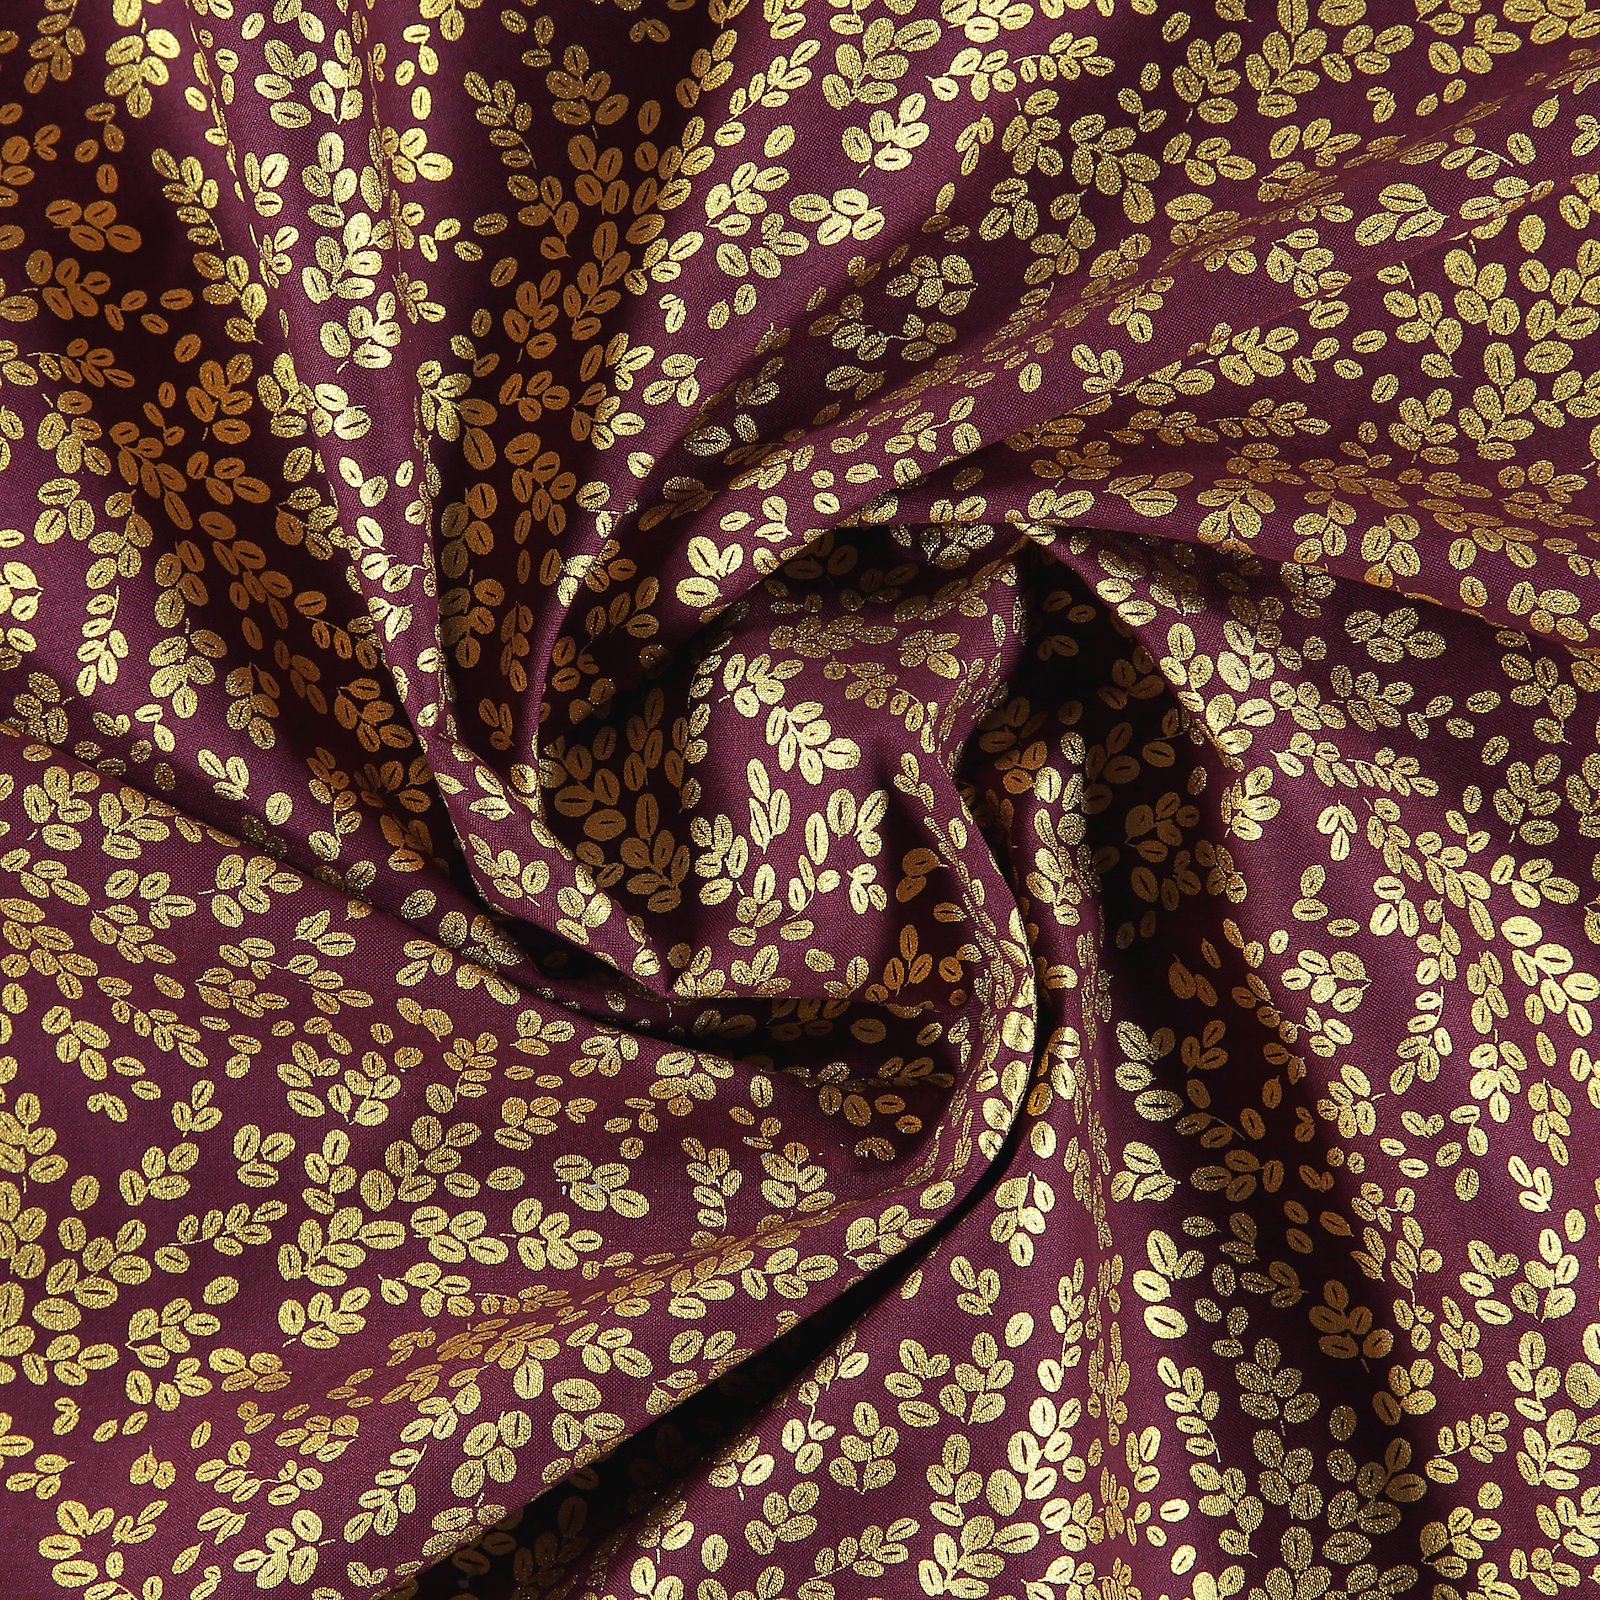 Cotton dark plum with gold leaves 852343_pack